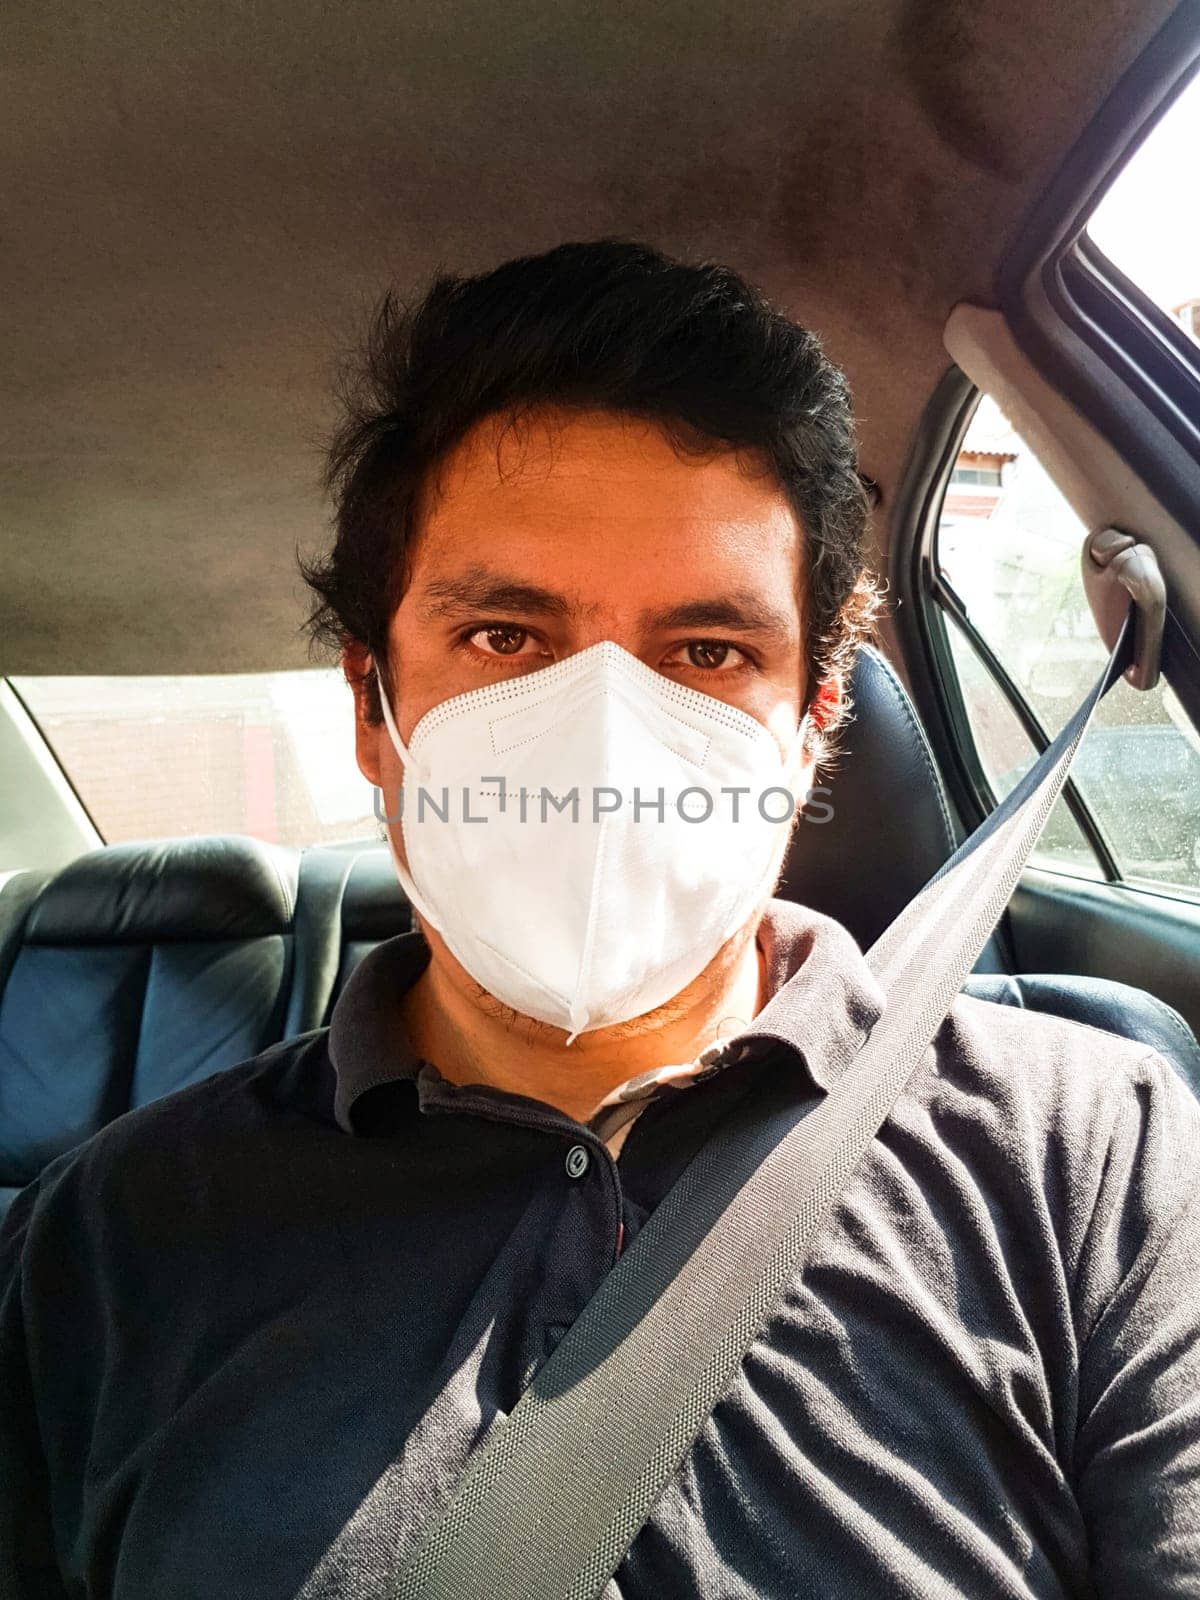 A man driving a car puts on a medical mask during an epidemic, a taxi driver in a mask, protection from the virus. by Peruphotoart